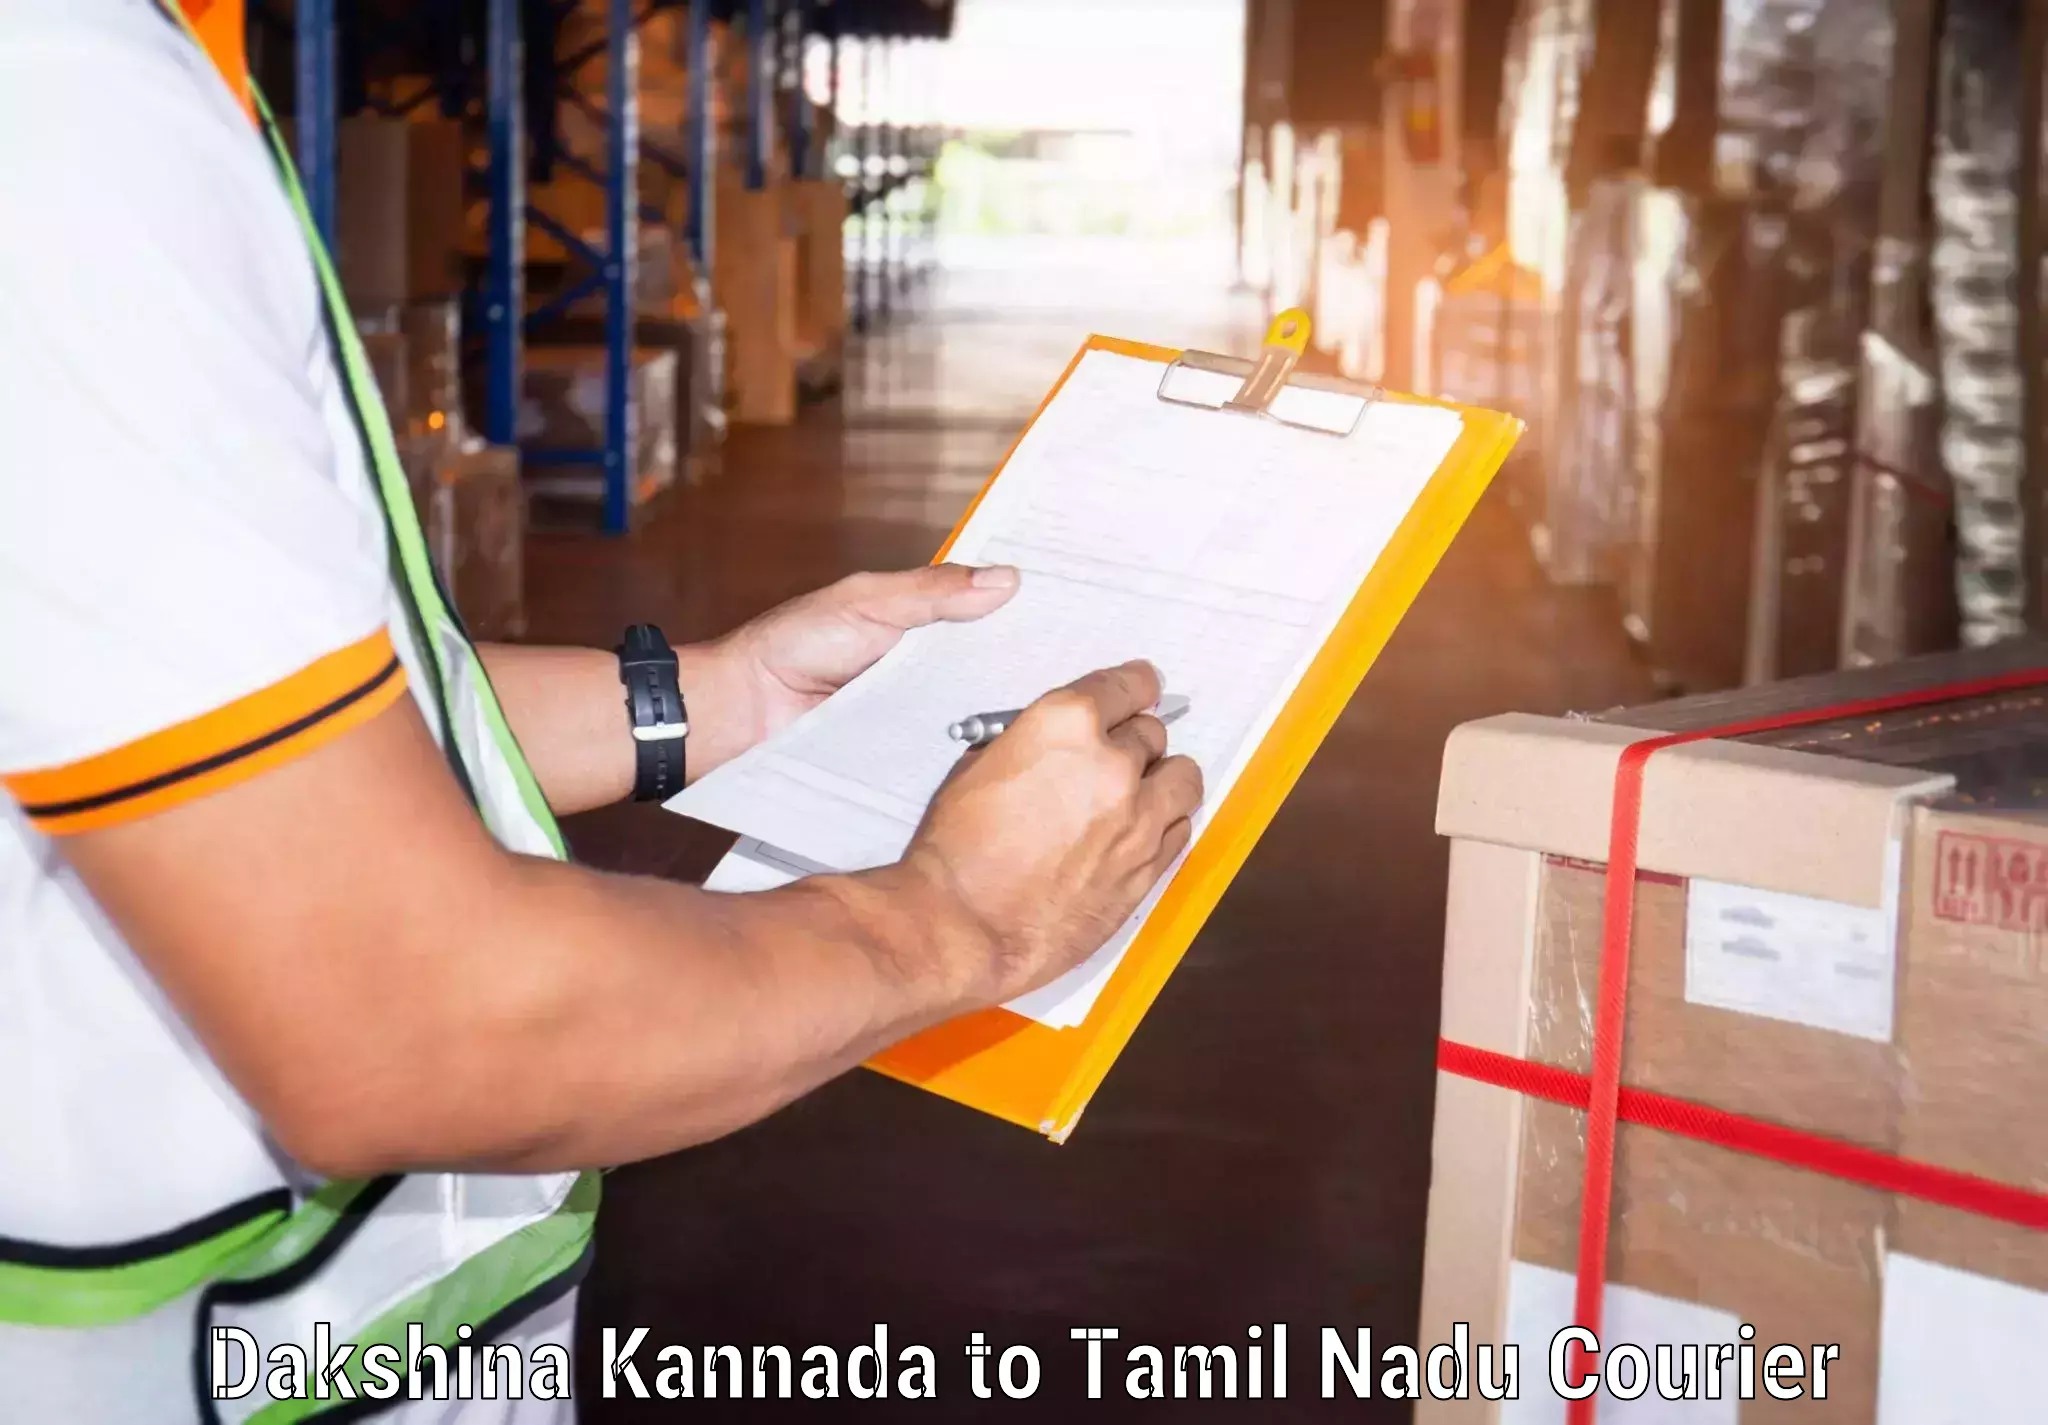 Affordable parcel service Dakshina Kannada to Sri Ramachandra Institute of Higher Education and Research Chennai